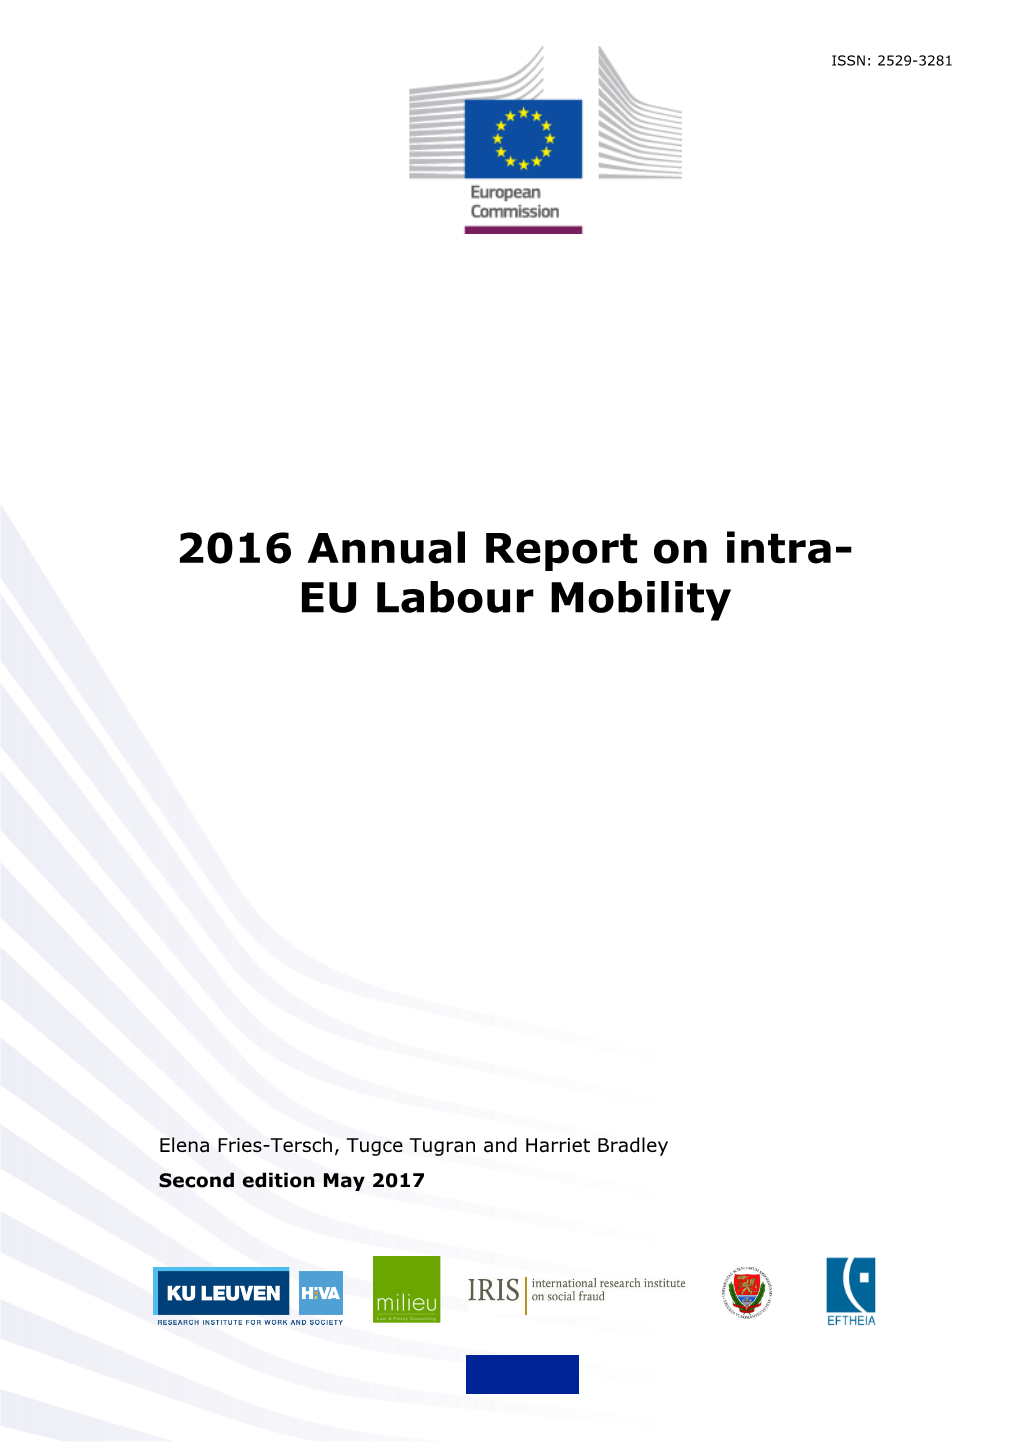 2016 Annual Report on Intra- EU Labour Mobility